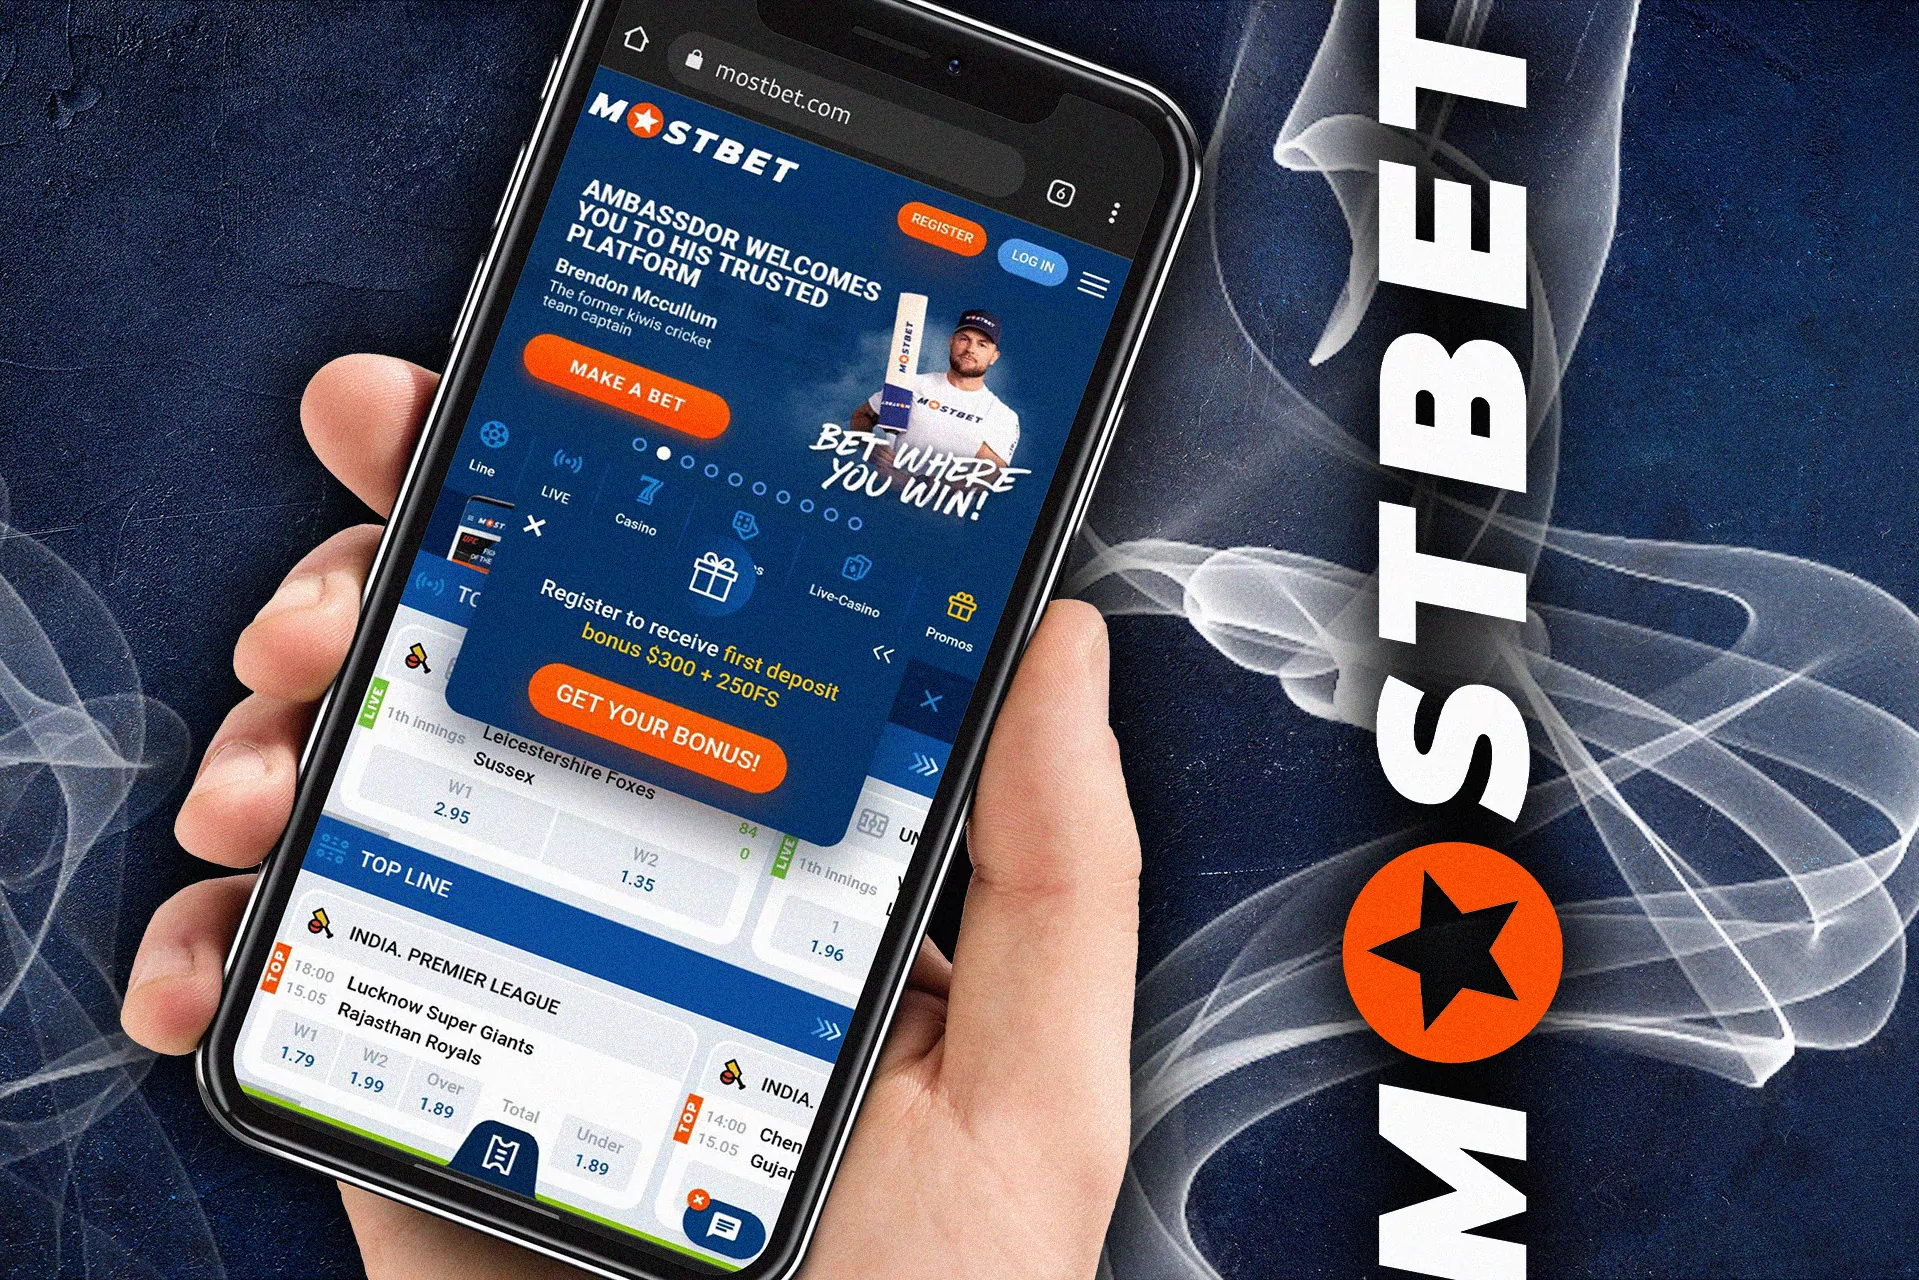 You do not have to download the app to use Mostbet.